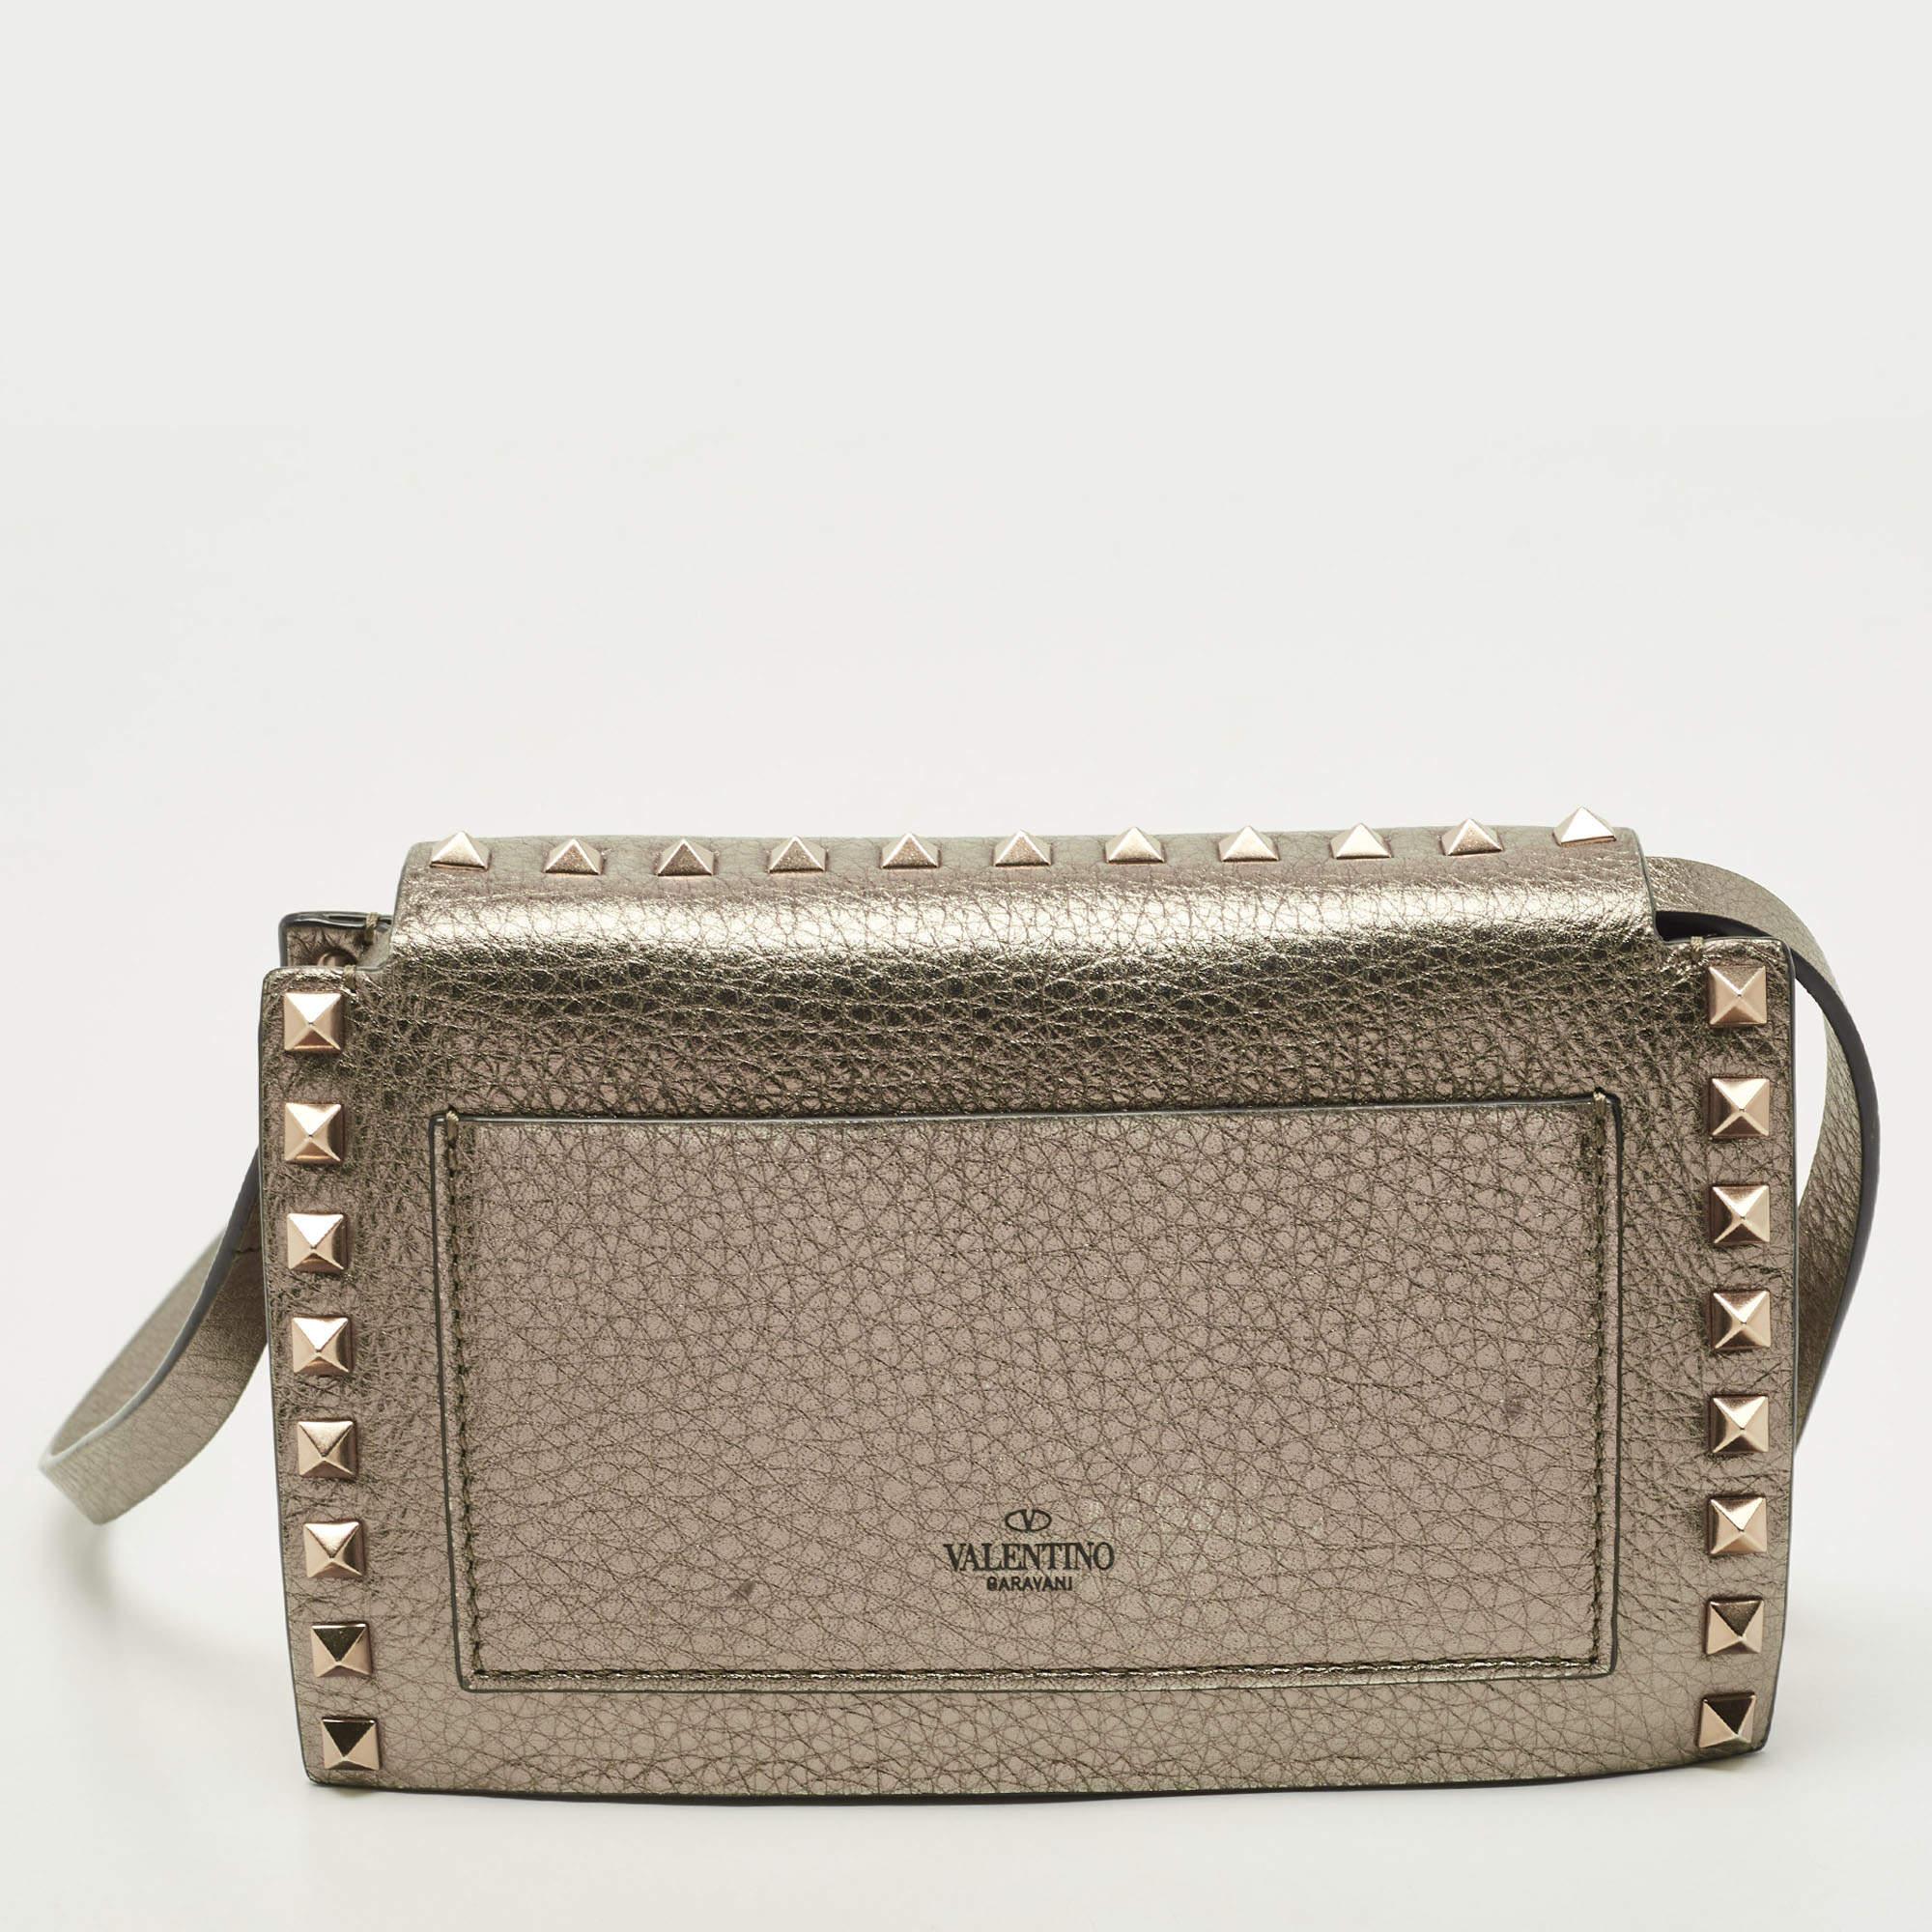 Express your personal style with this high-end crossbody bag. Crafted from quality materials, it has been added with fine details and is finished perfectly. It features a well-sized interior.

Includes: Extra Studs